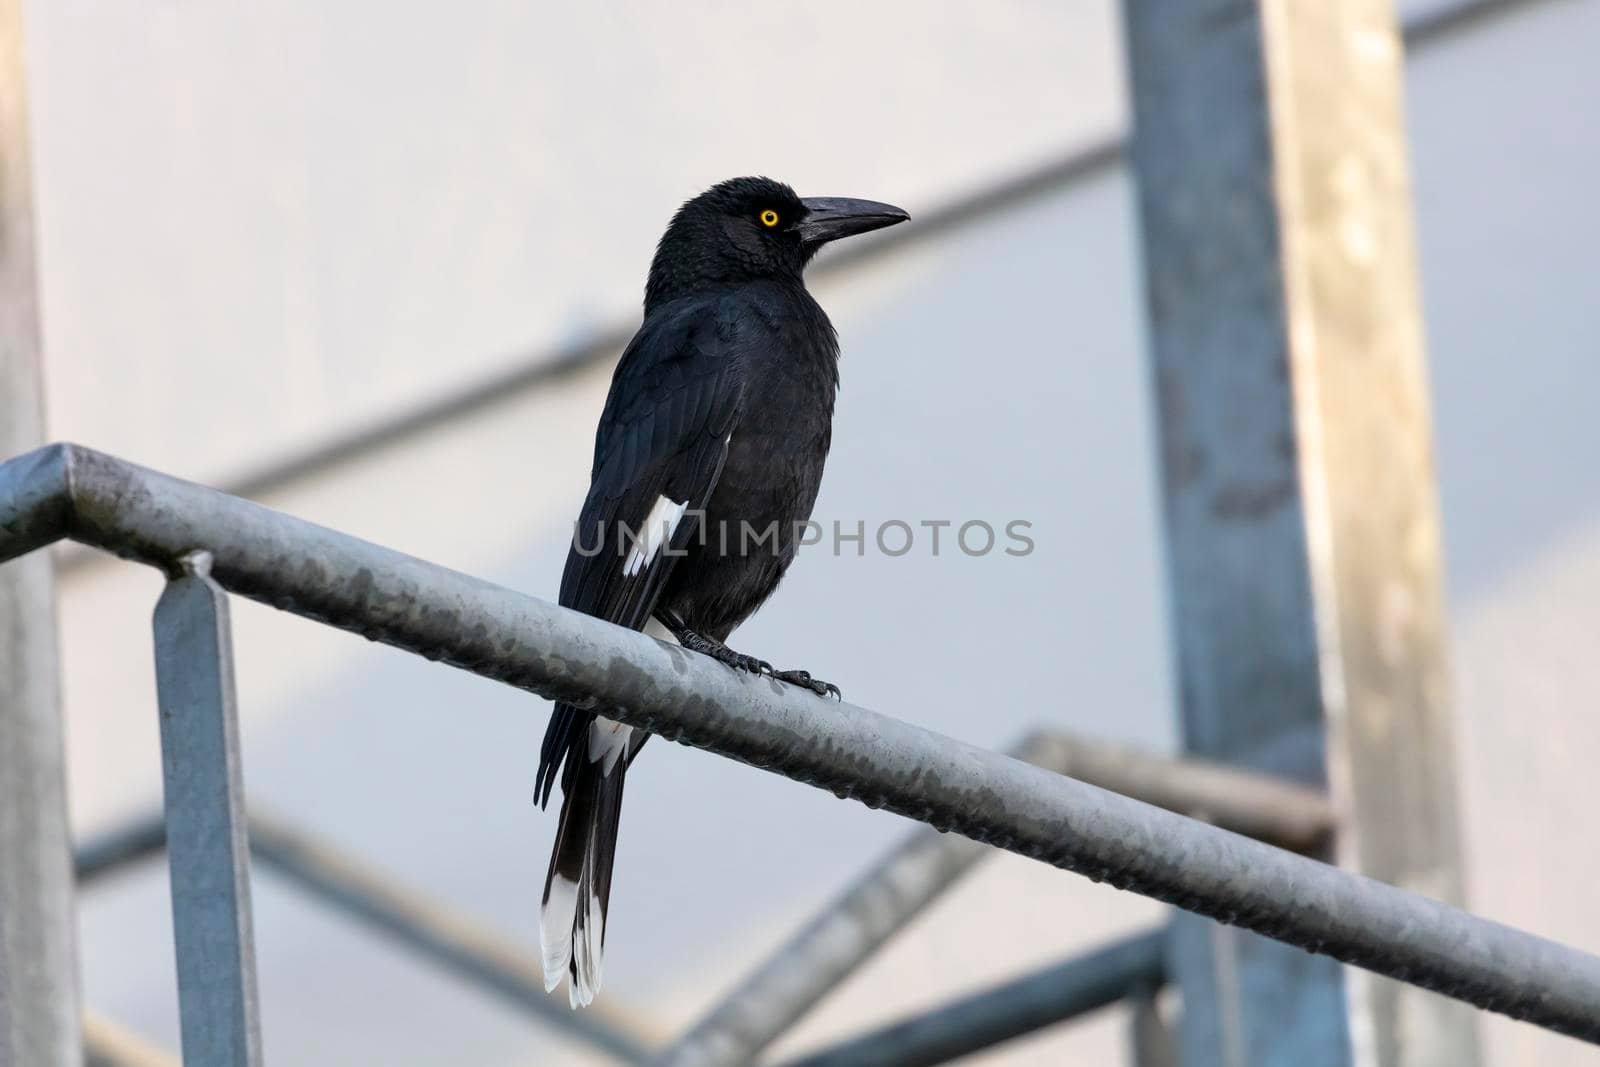 A Pied Currawong bird standing on a grey galvanised steel fence in The Blue Mountains in New South Wales in Australia